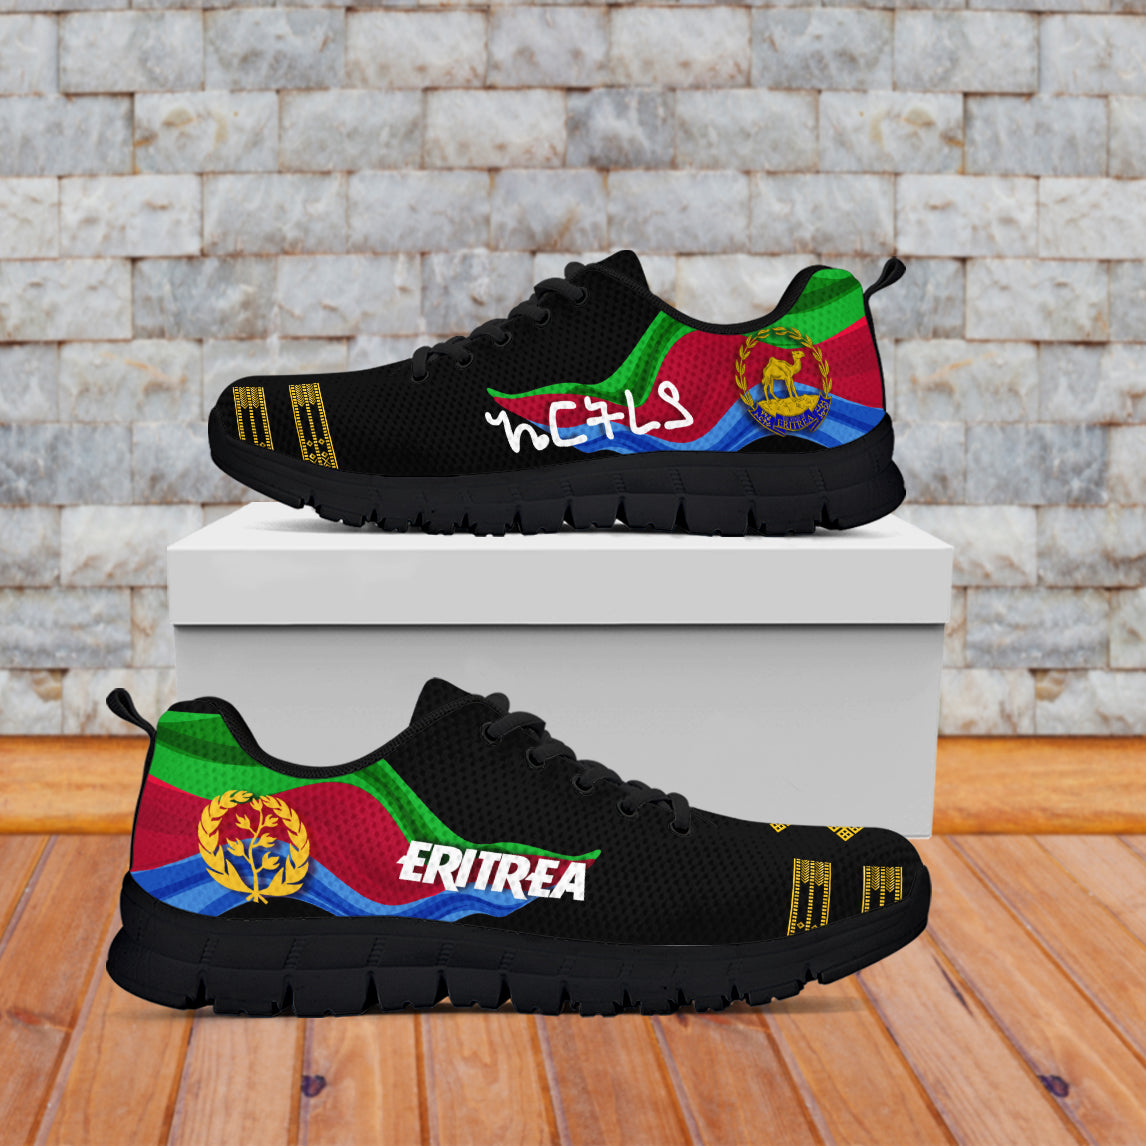 eritrea-independence-day-sneakers-ethnic-african-pattern-black